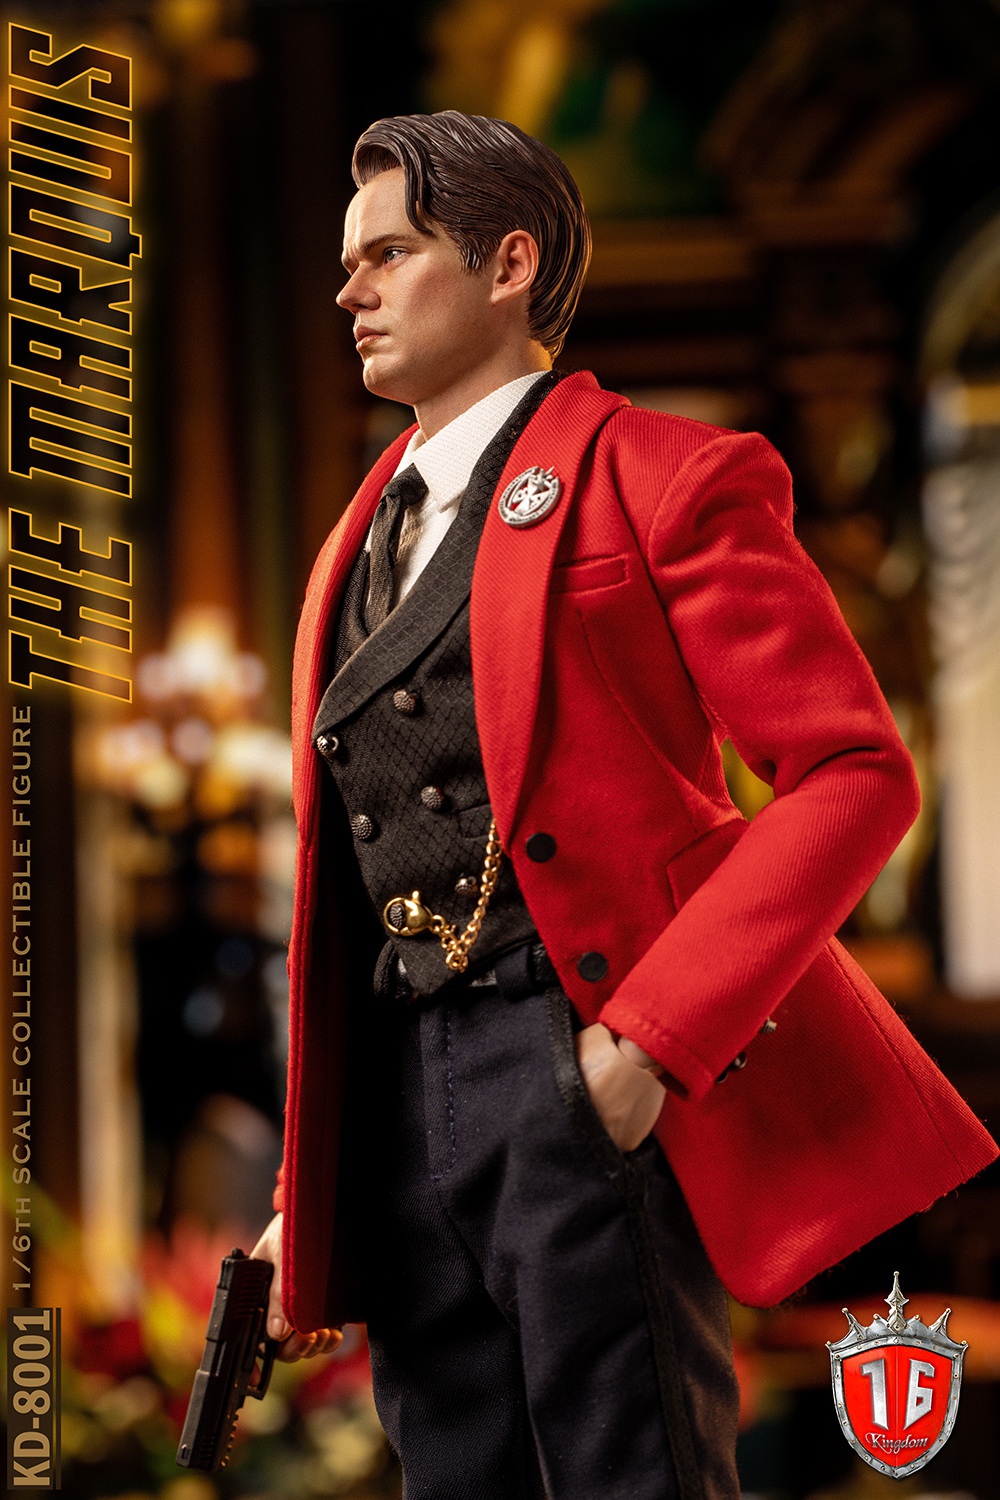 Kingdom - NEW PRODUCT: Kingdom: 1/6 The Marquis Action Figure KD-8001 11405910